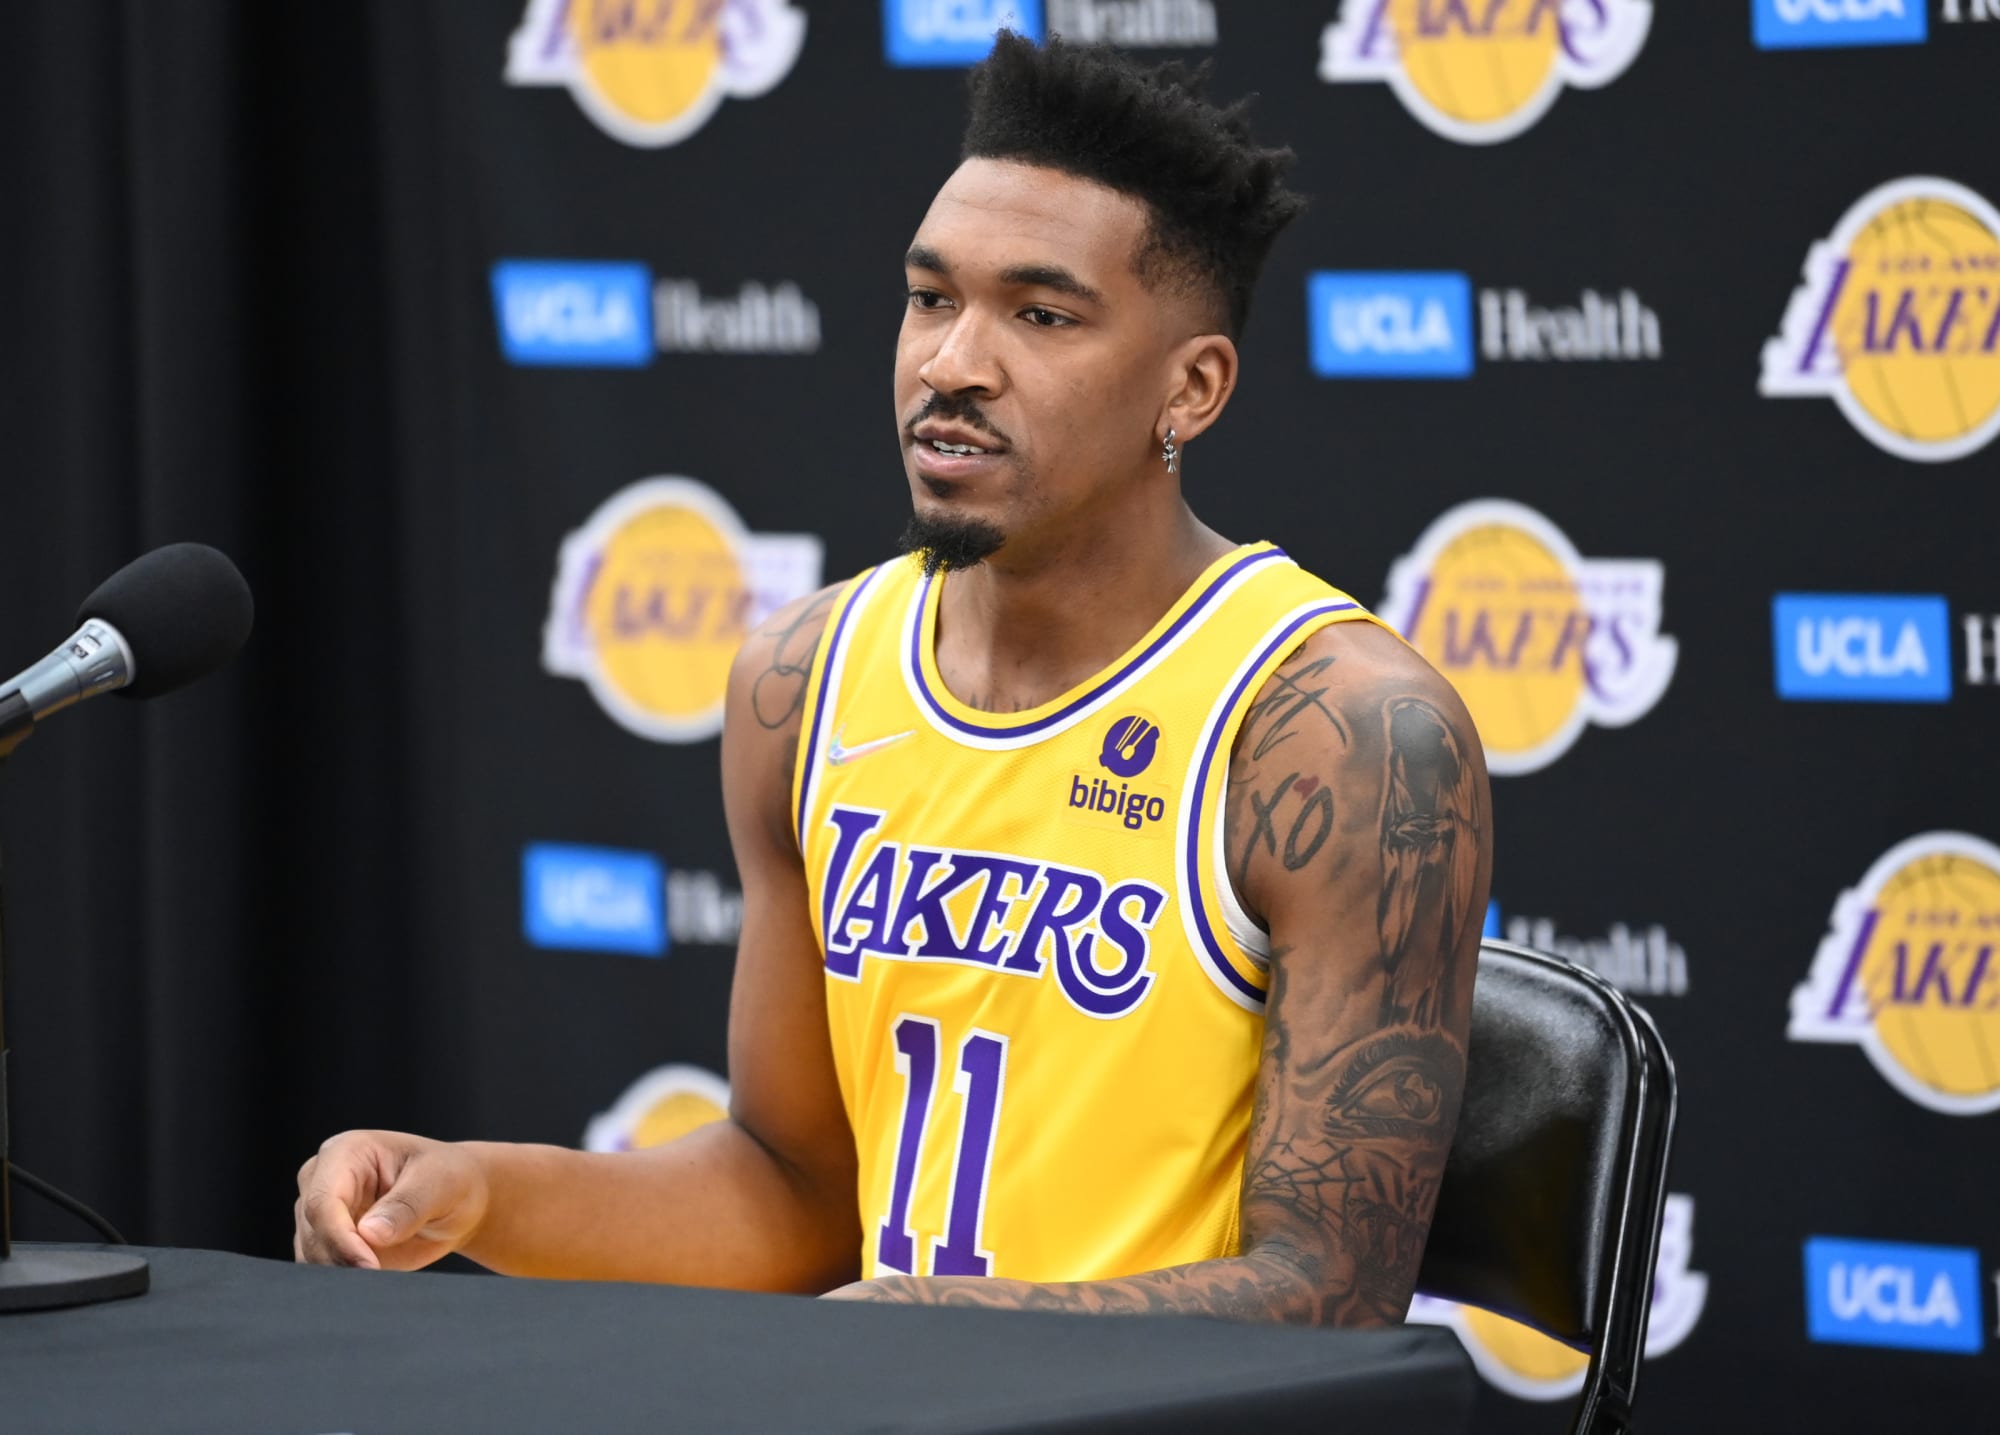 Los Angeles Lakers - OFFICIAL: Malik Monk x #LakeShow